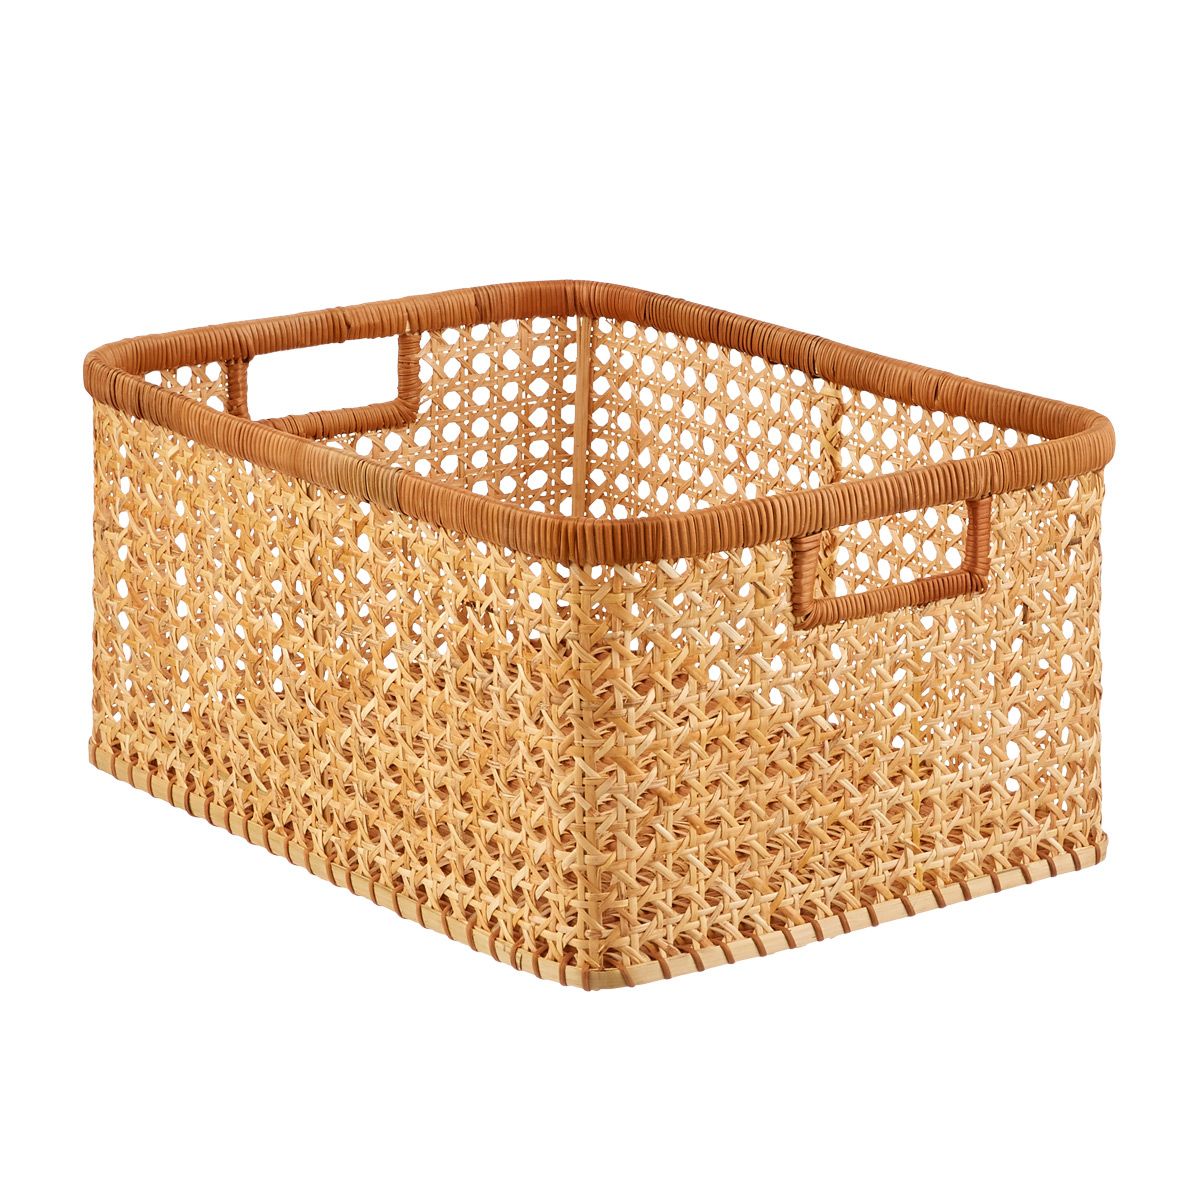 Medium Albany Cane Rattan Bin Natural | The Container Store